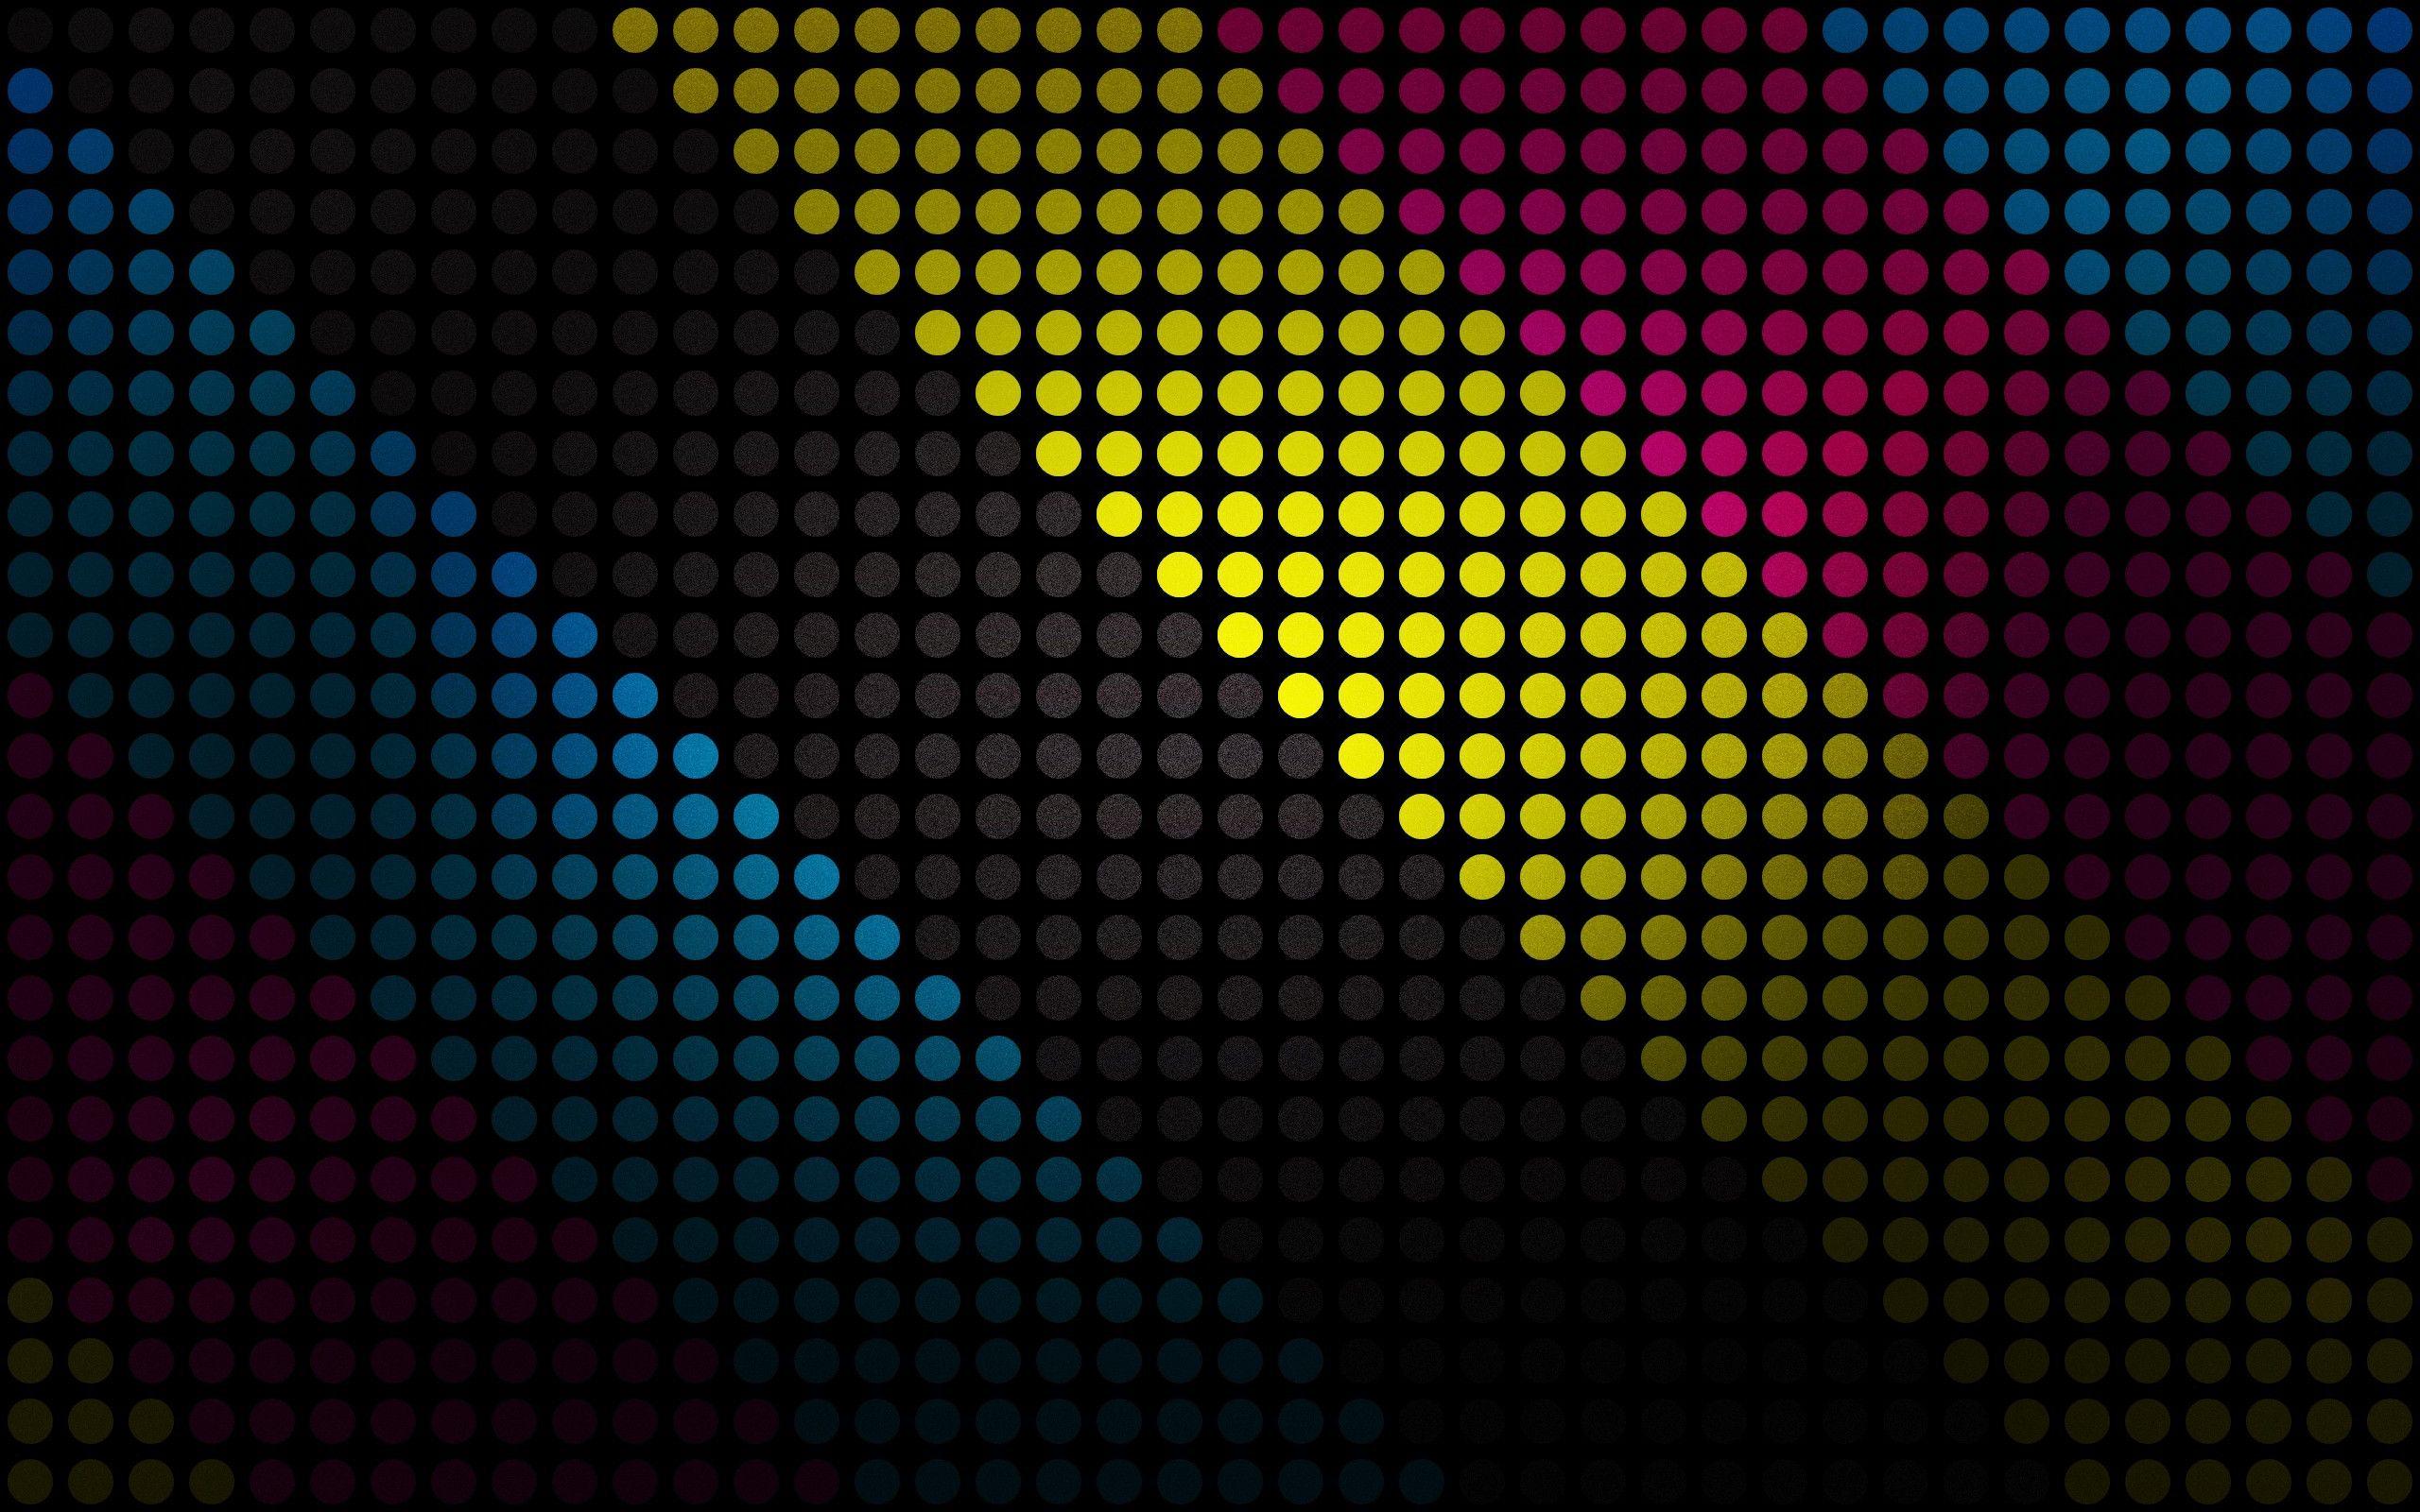 Wallpapers perfect for AMOLED screens